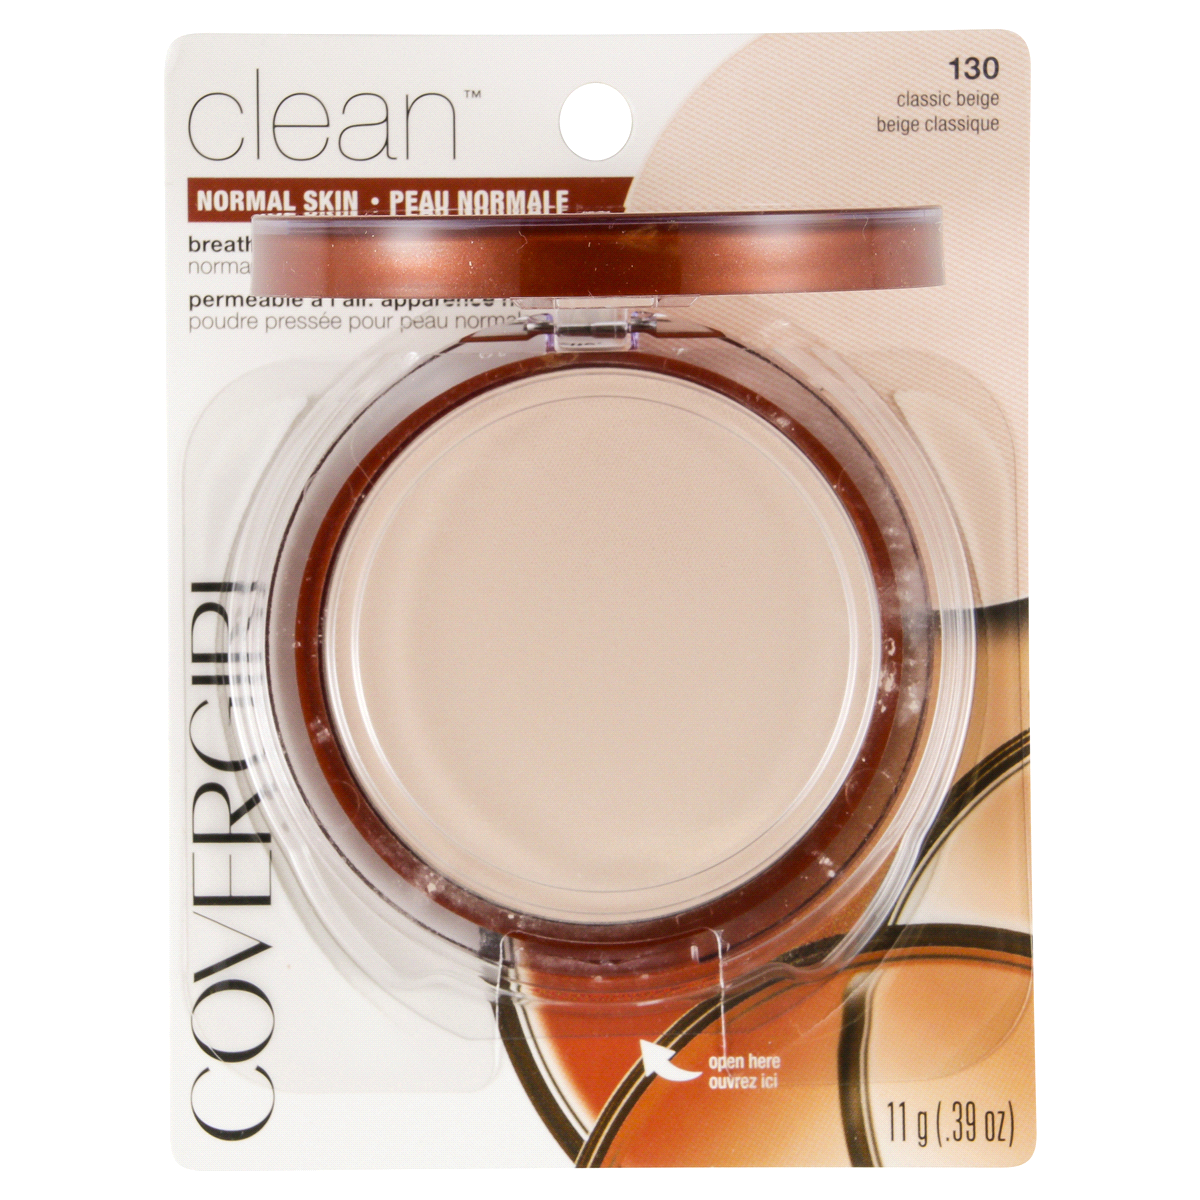 slide 4 of 7, Covergirl COVERGIRL Clean Pressed Powder Classic Beige 130, 11 G 0.39 OZ, 1 ct